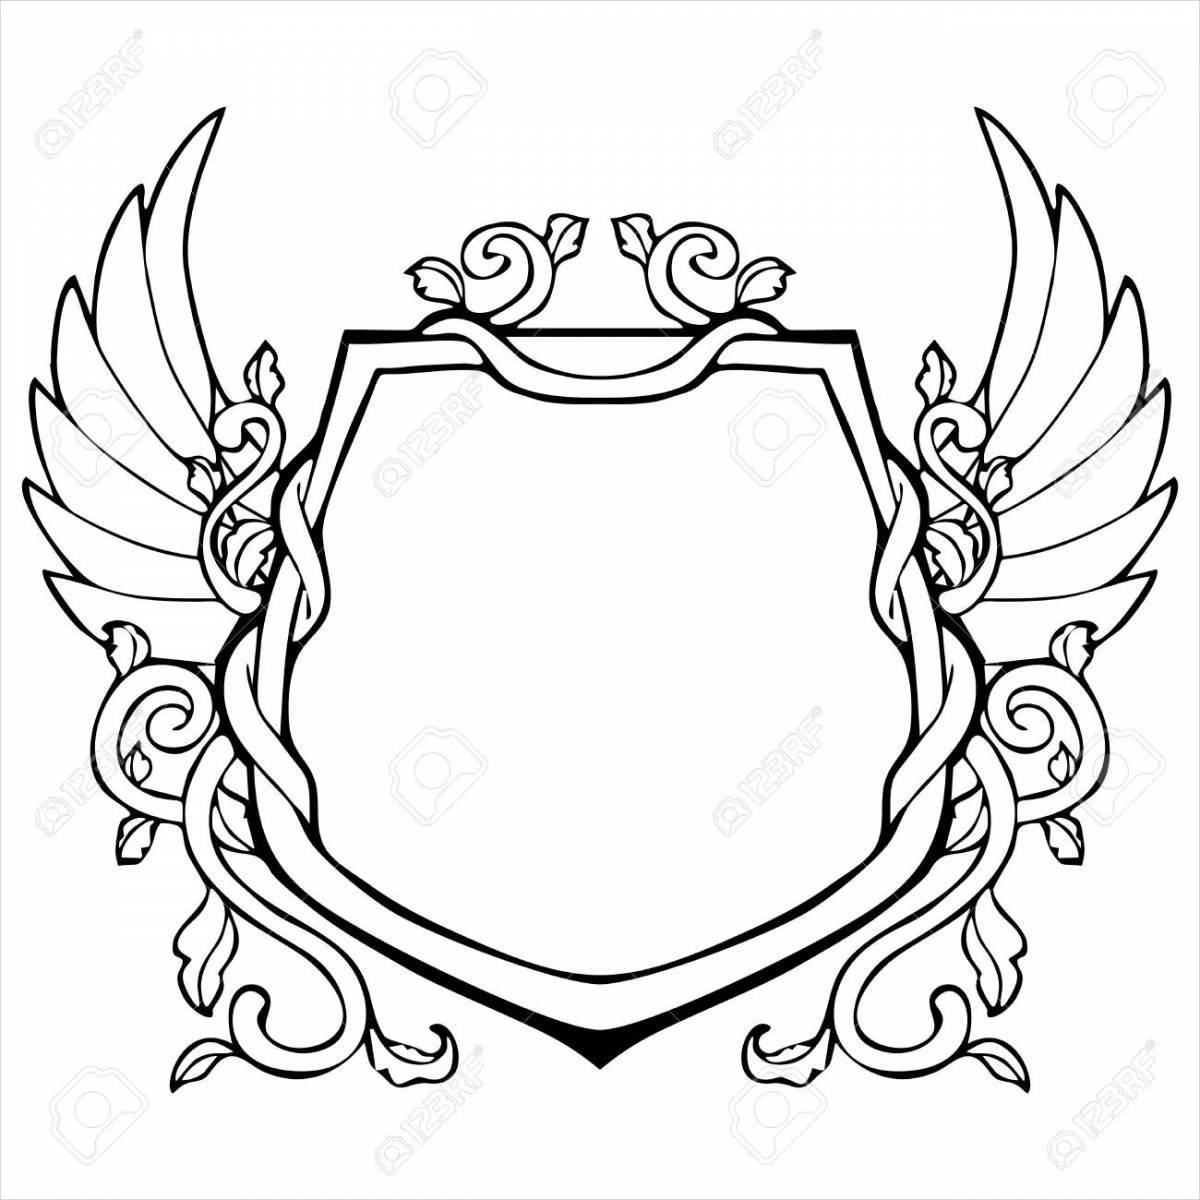 My family coat of arms #5